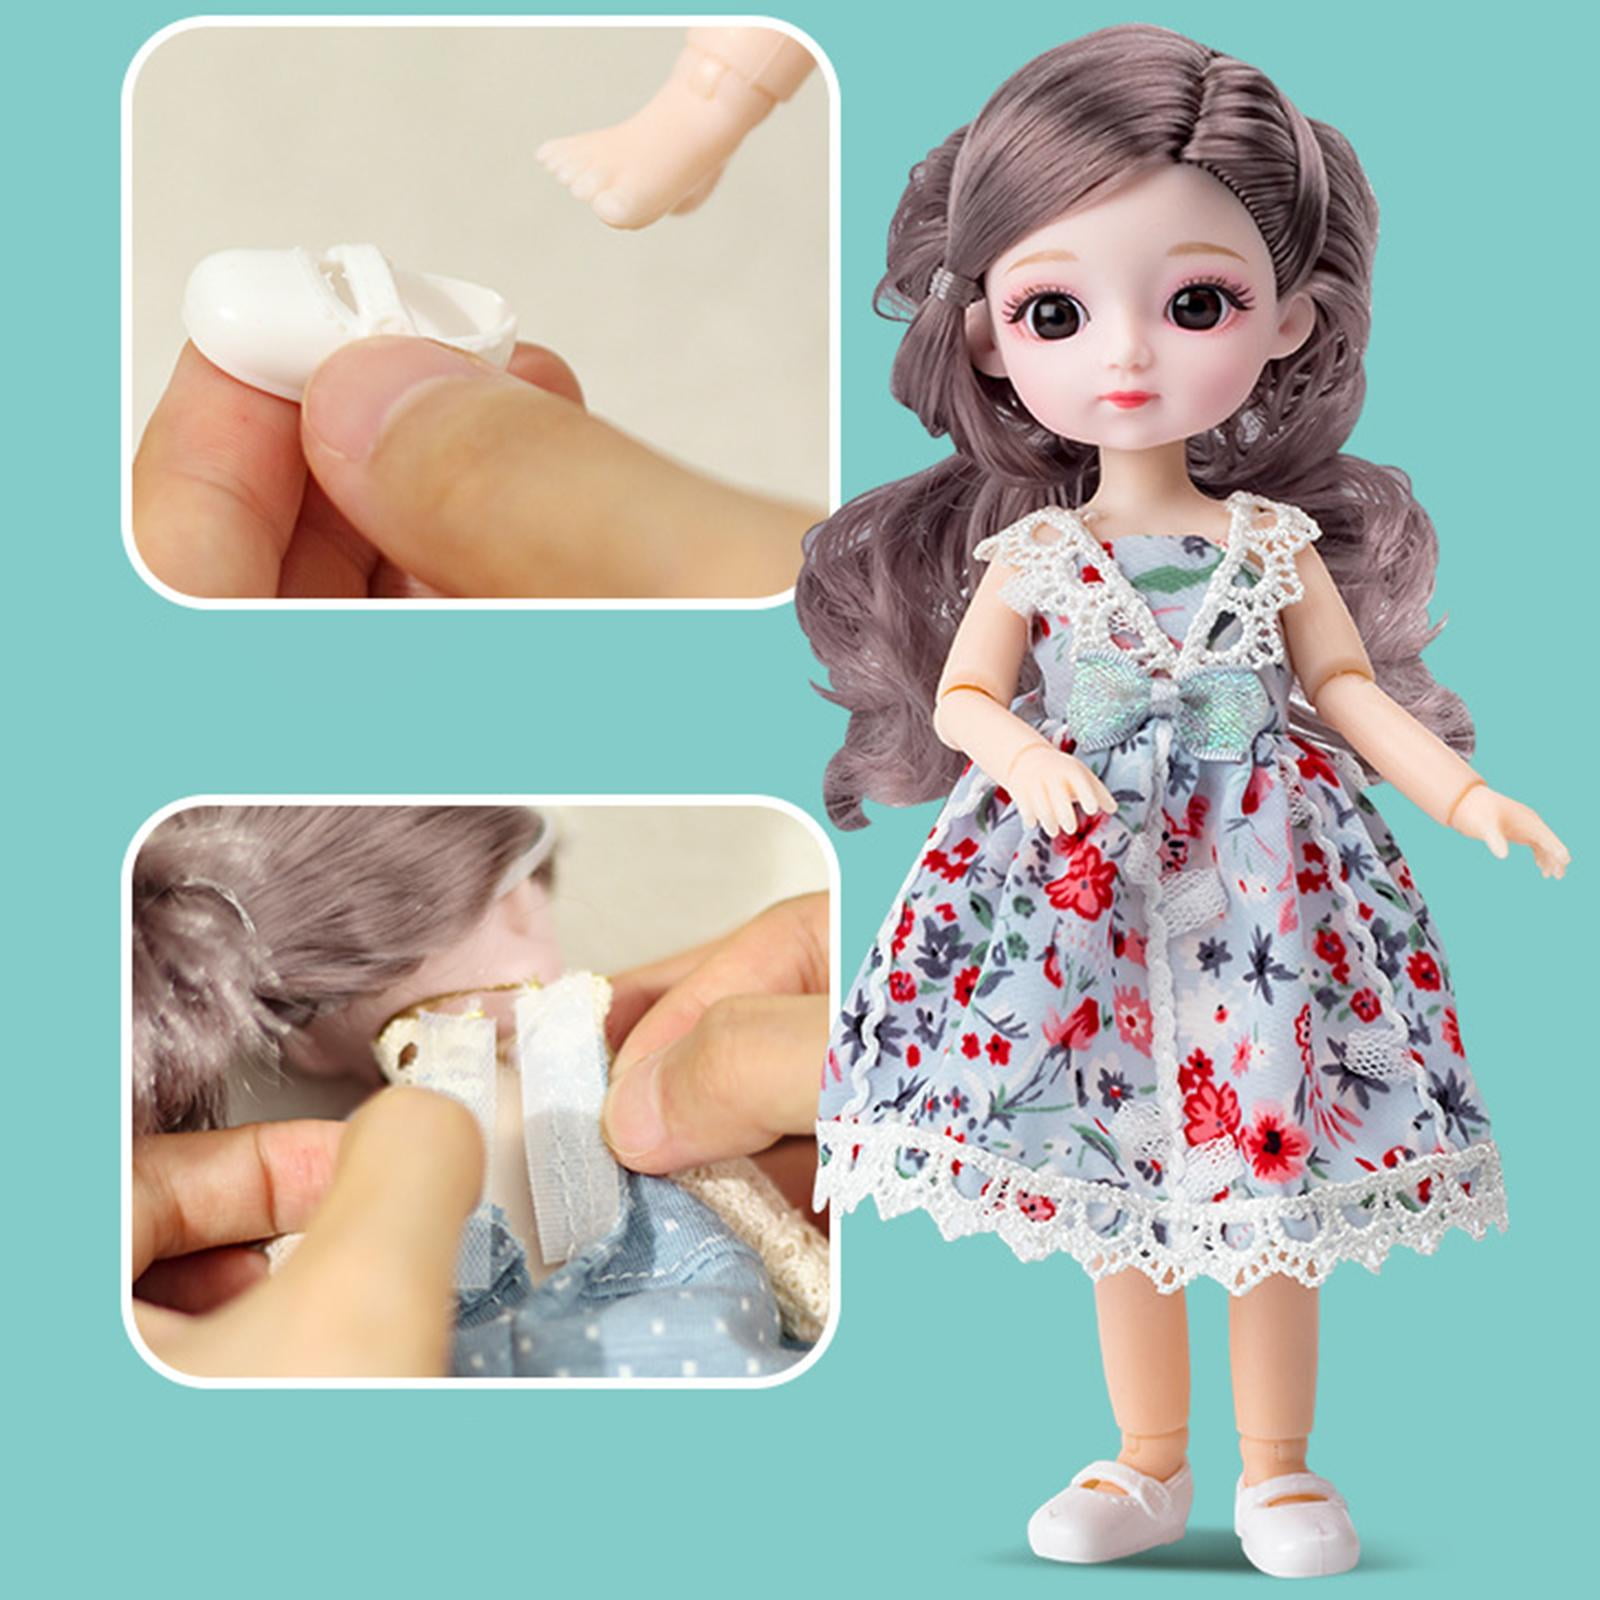 1/8 Bjd Dolls with Moveable Joints: Versatile Dolls for Business Buyers